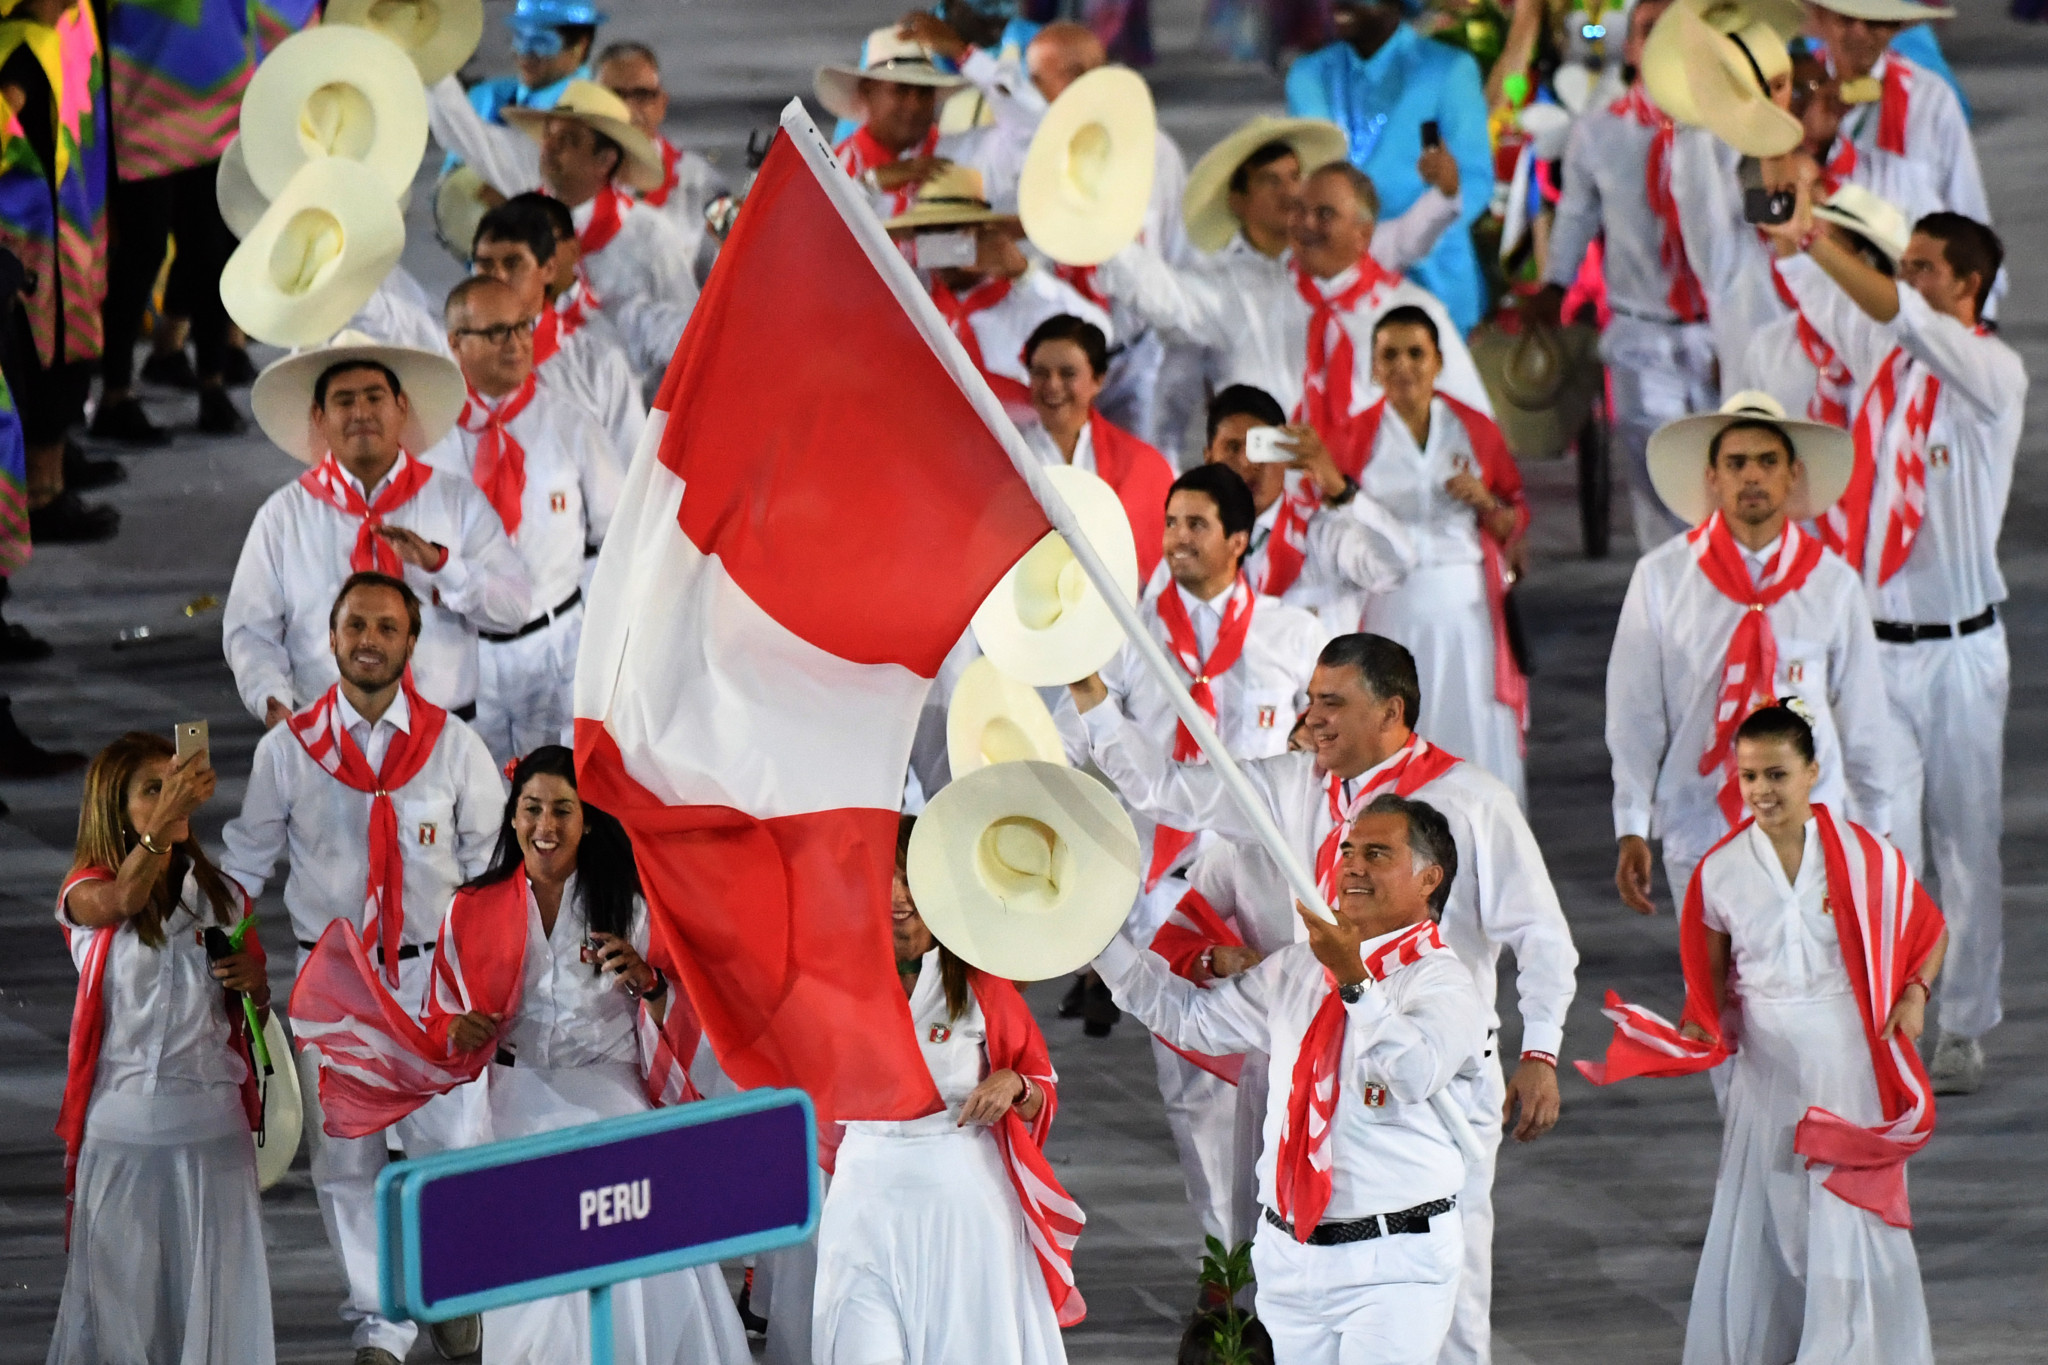 Francisco Boza Dibós pictured carrying the Peruvian flag at the Opening Ceremony of Rio 2016 ©Getty Images